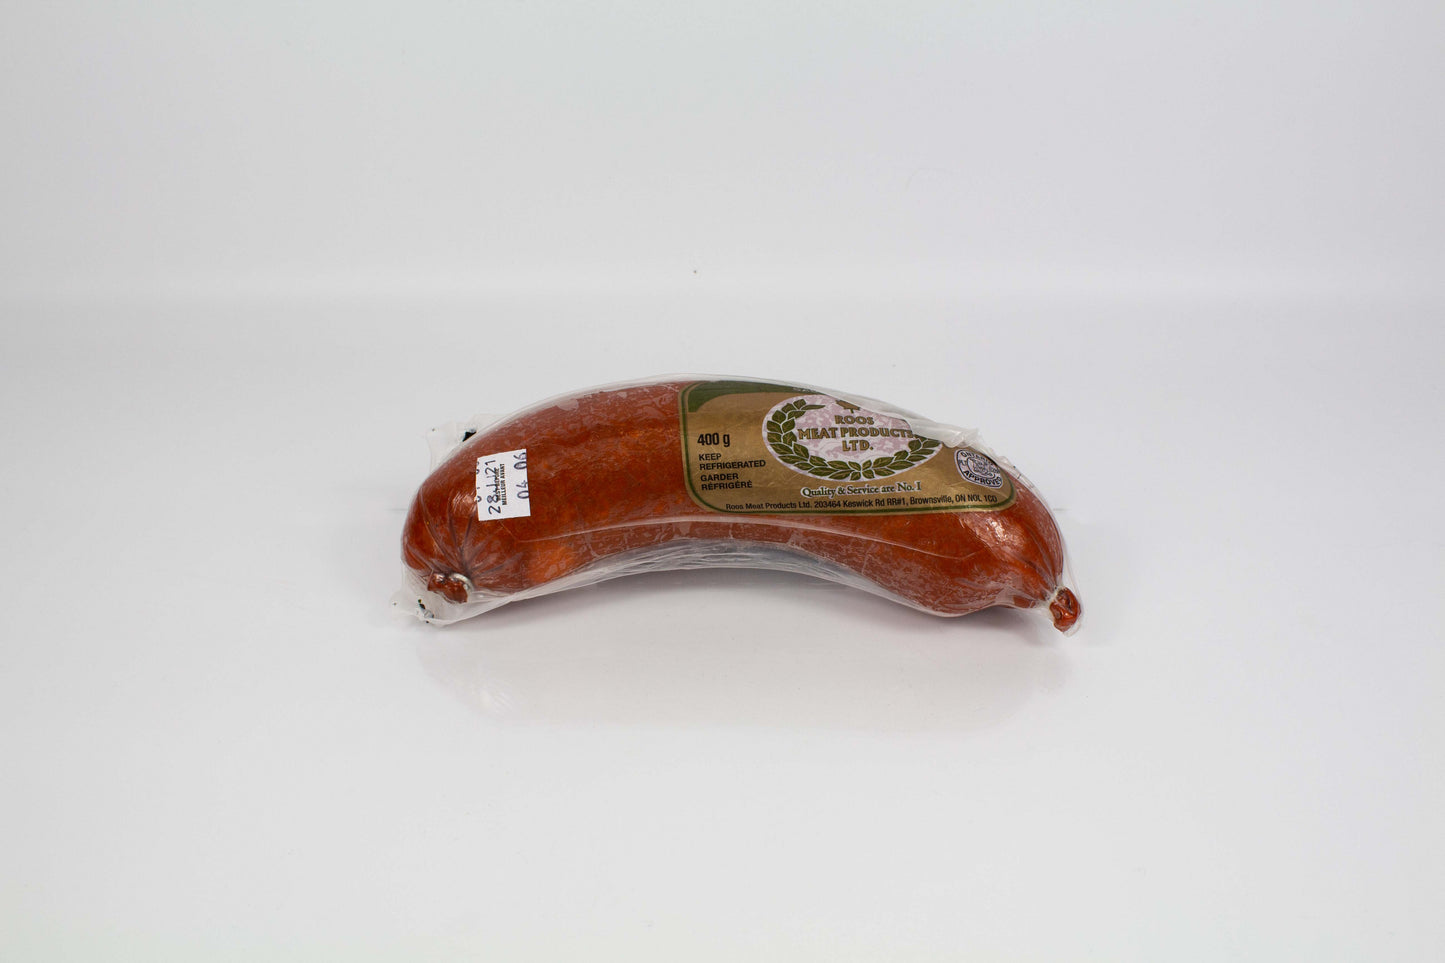 Roos Meat Products Coil Sausage (Palingworst)